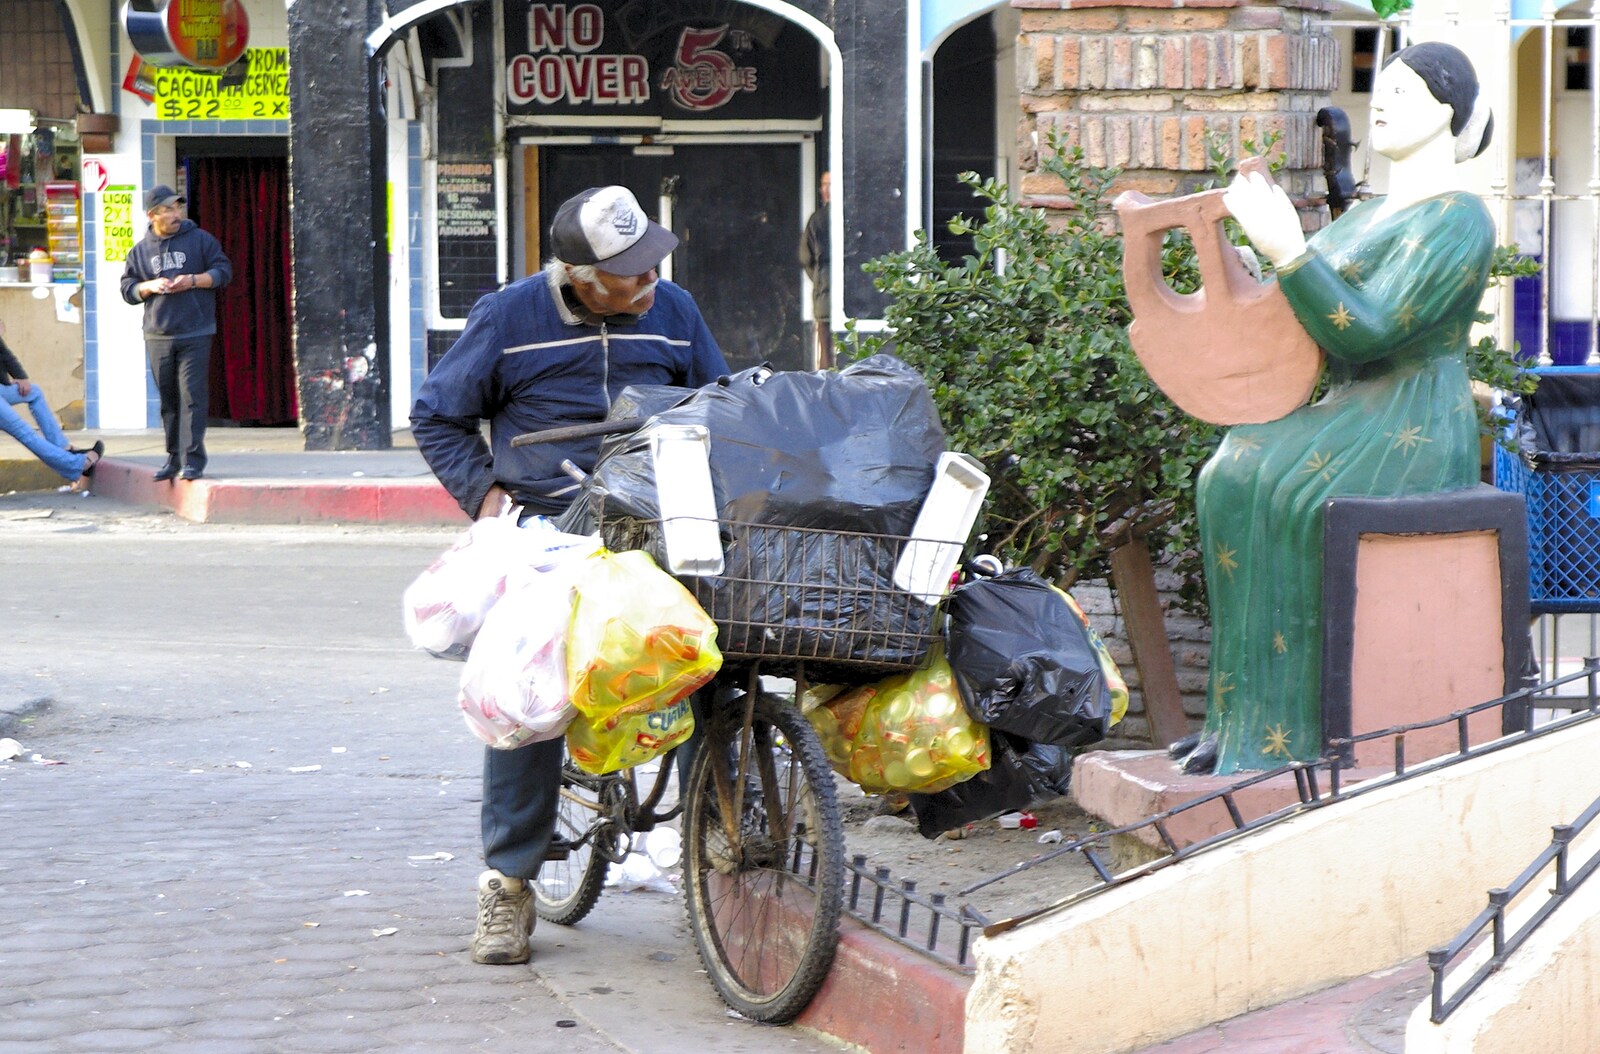 Rosarito and Tijuana, Baja California, Mexico - 2nd March 2008: Old man on a bike, with his wordly possessions